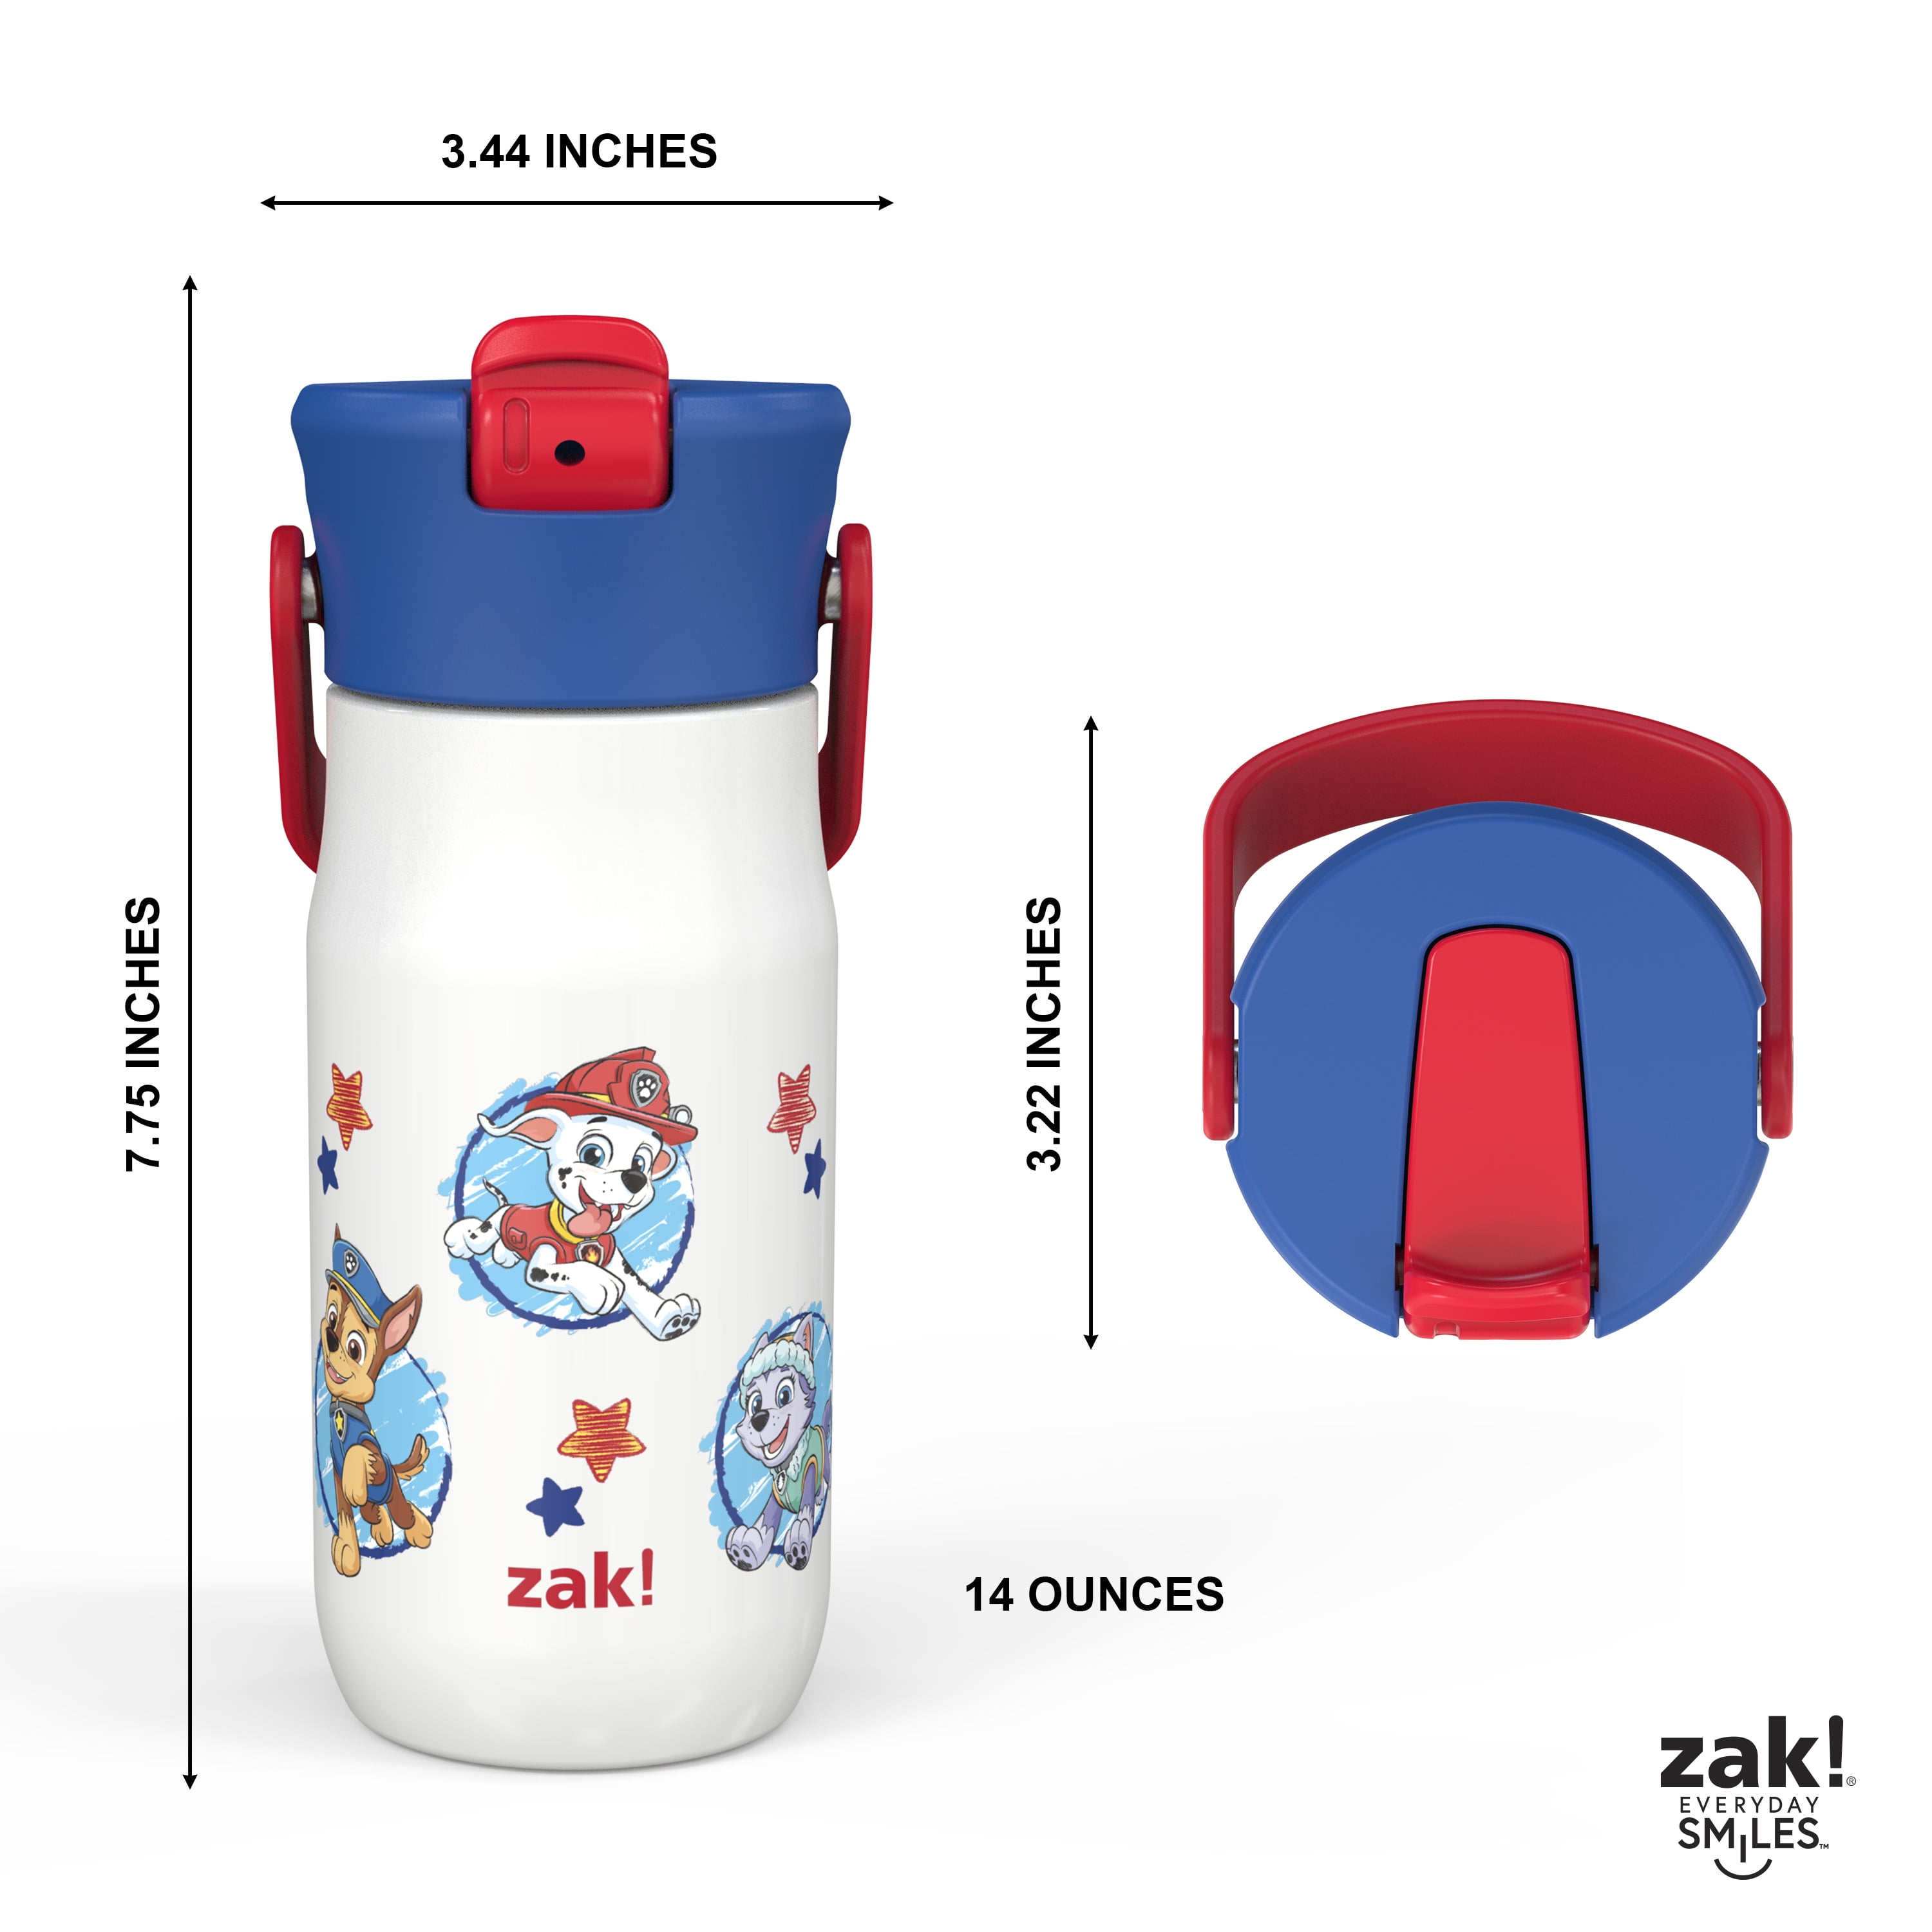 Gabby Dollhouse Kids Flip Top Water Bottle – J and F Creations